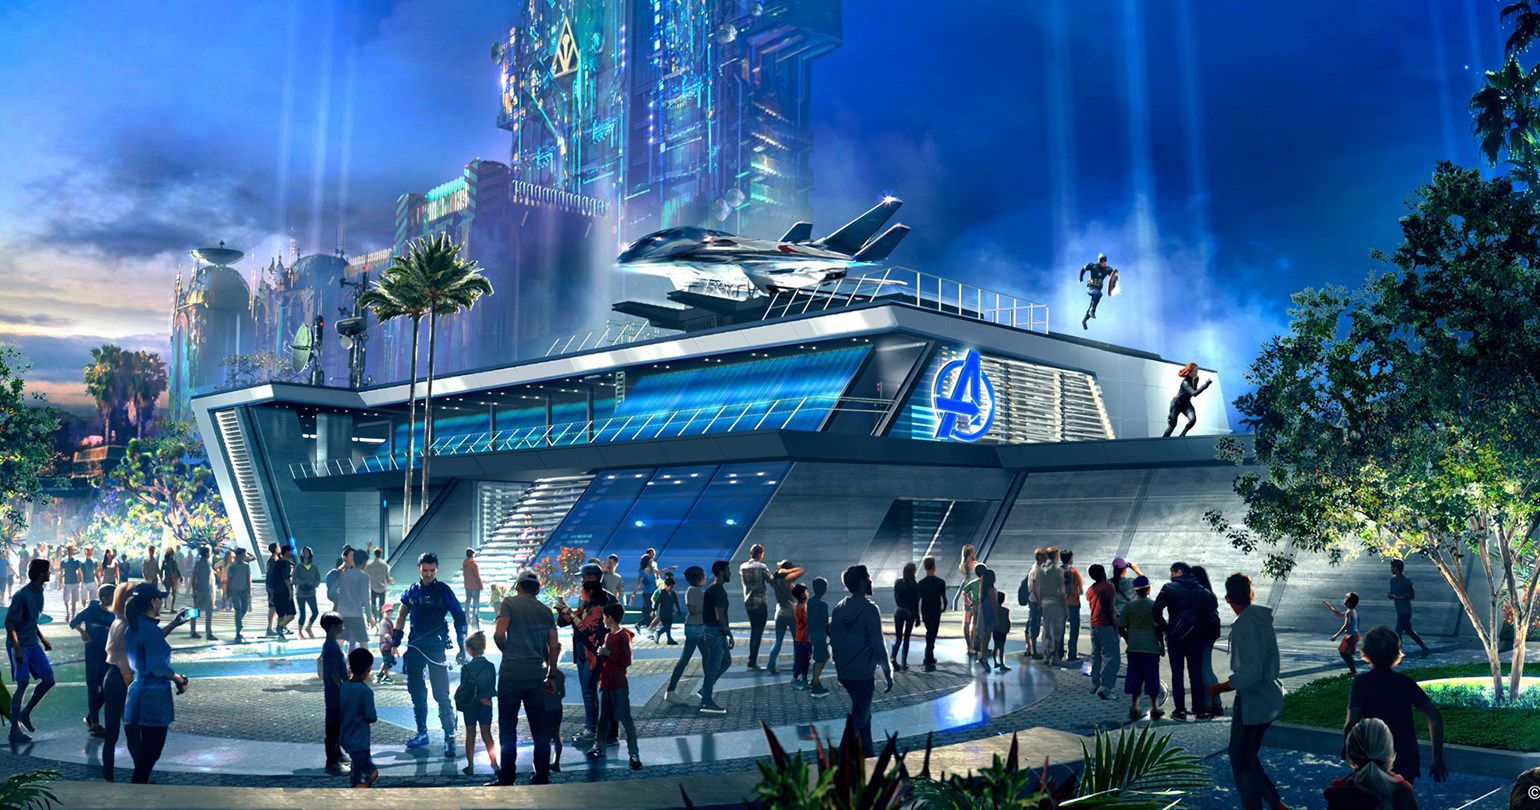 Disneyland's Avengers Campus Looks Even More Marvelous Lit Up at Night